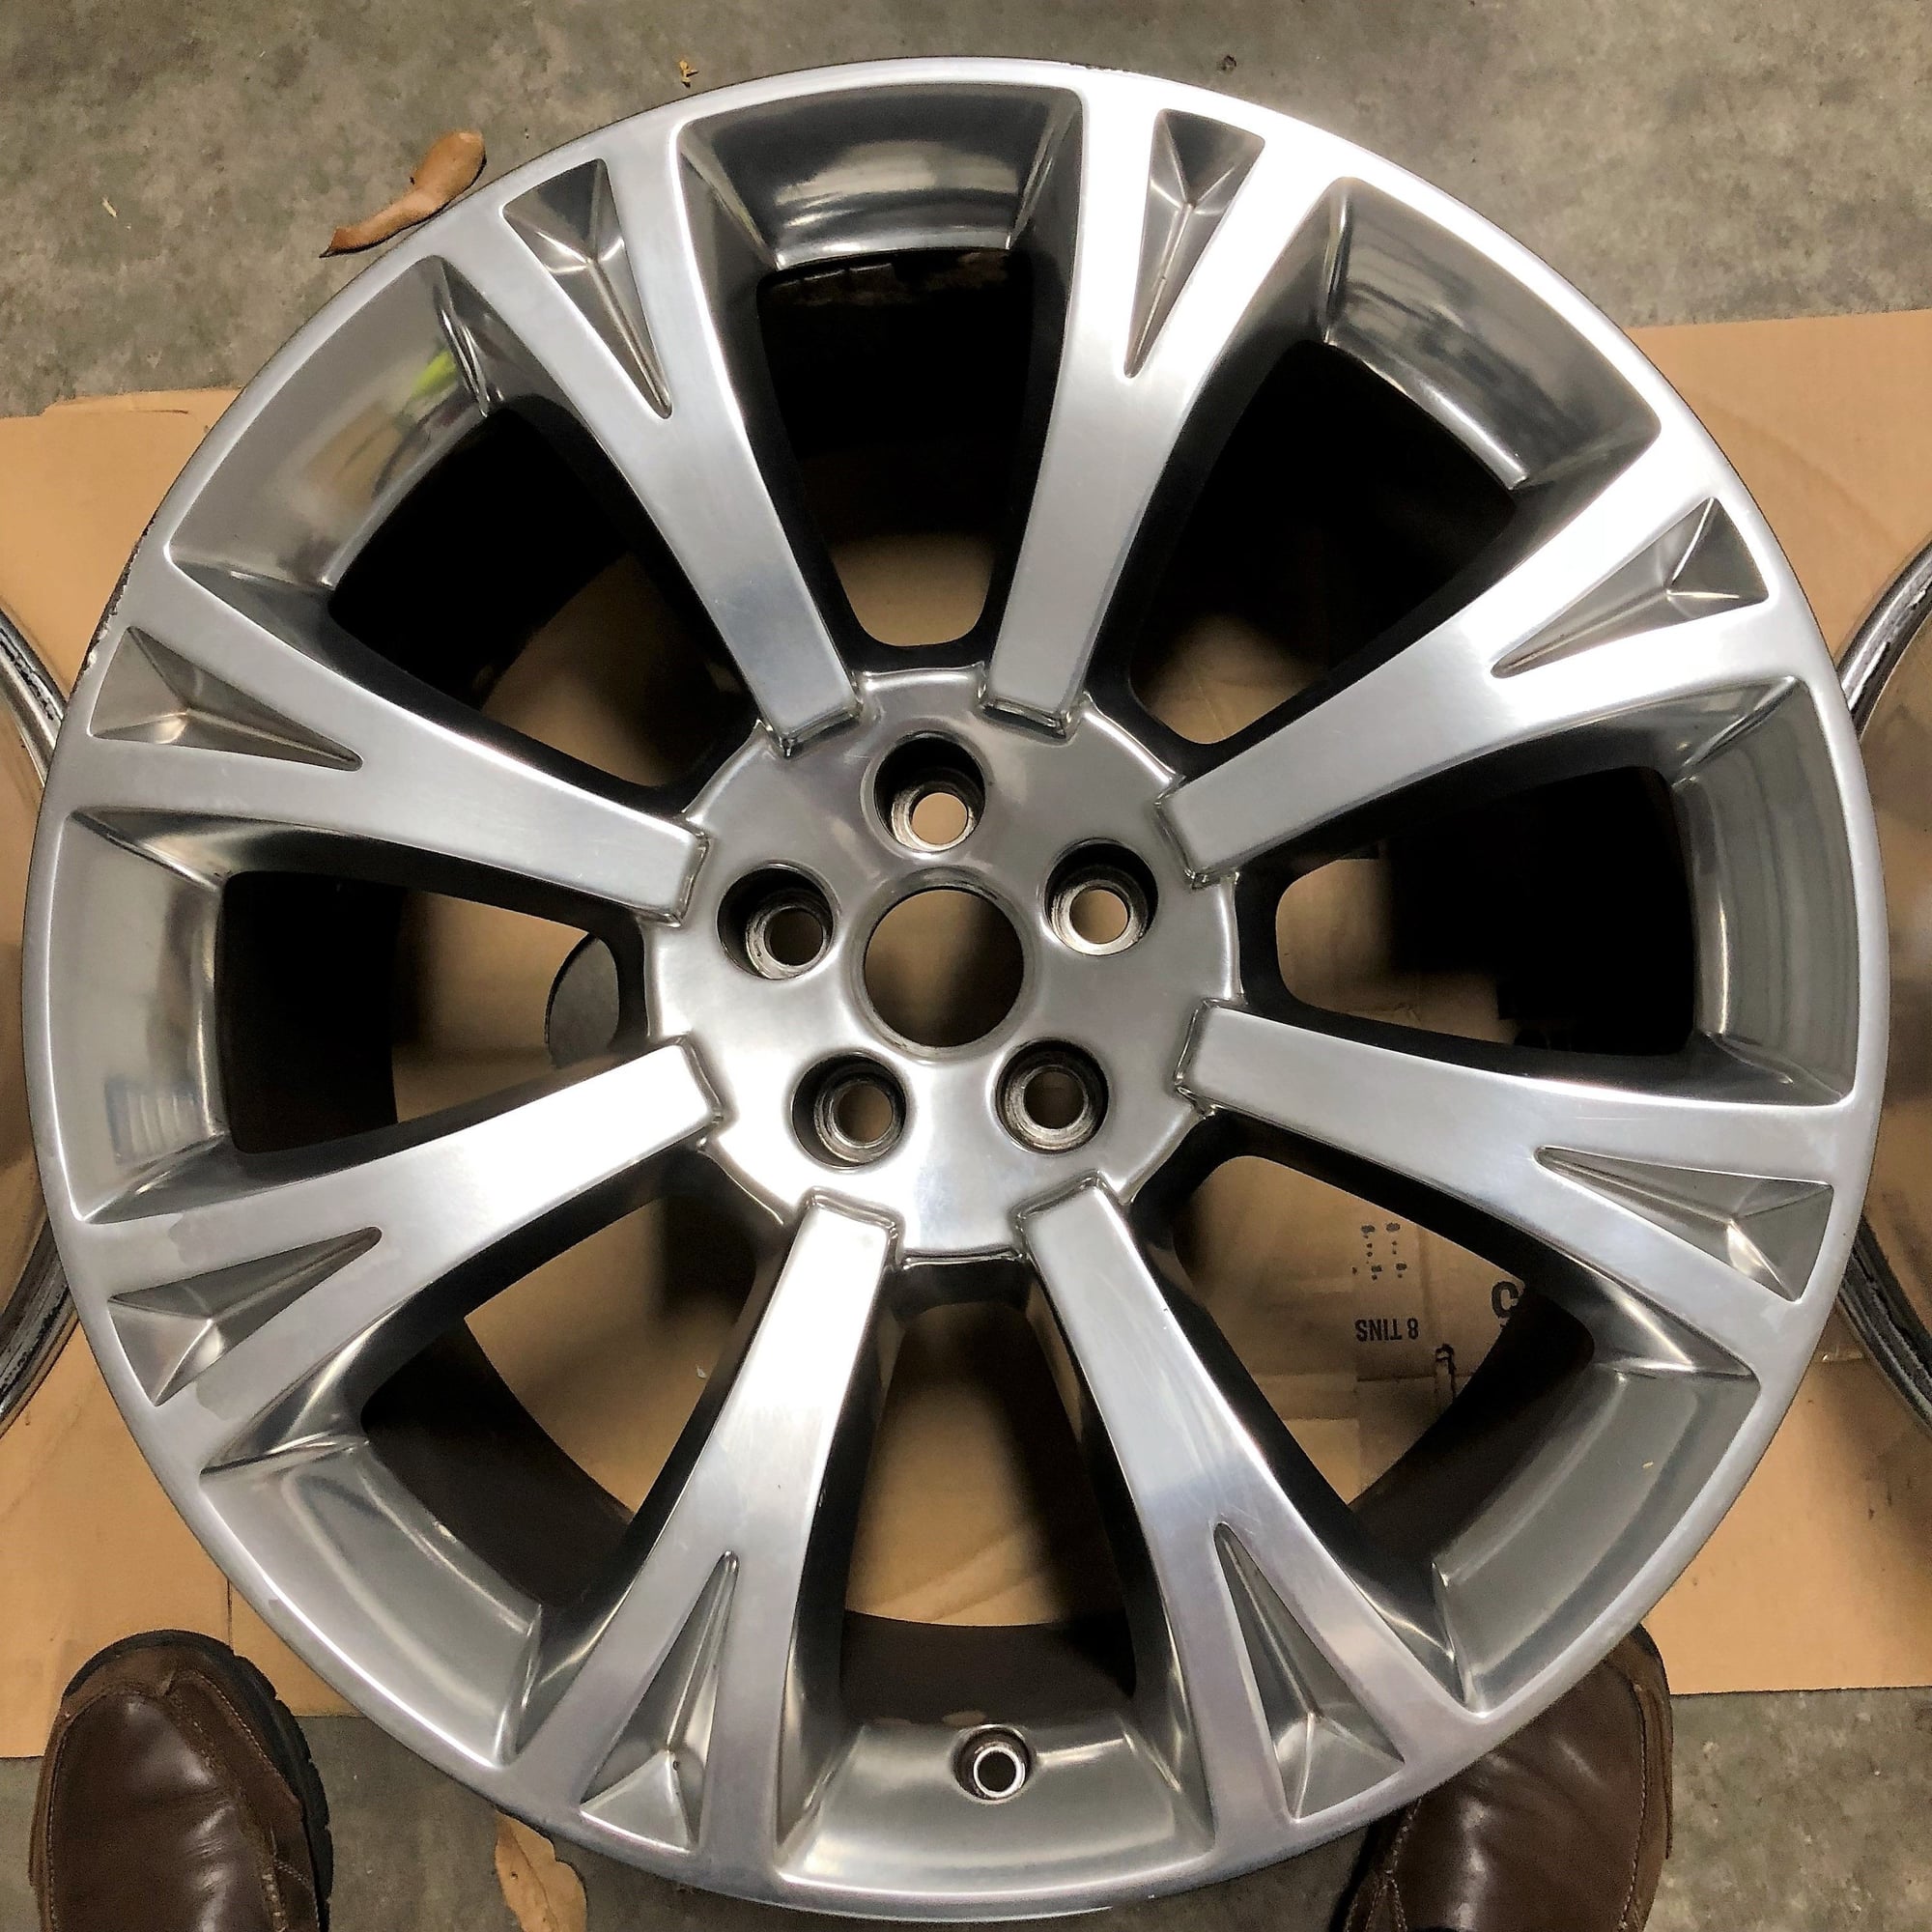 Wheels and Tires/Axles - Factory-Polished Orona Wheels (20" Staggered set from 2013 XKR) - Used - Plano, TX 75093, United States